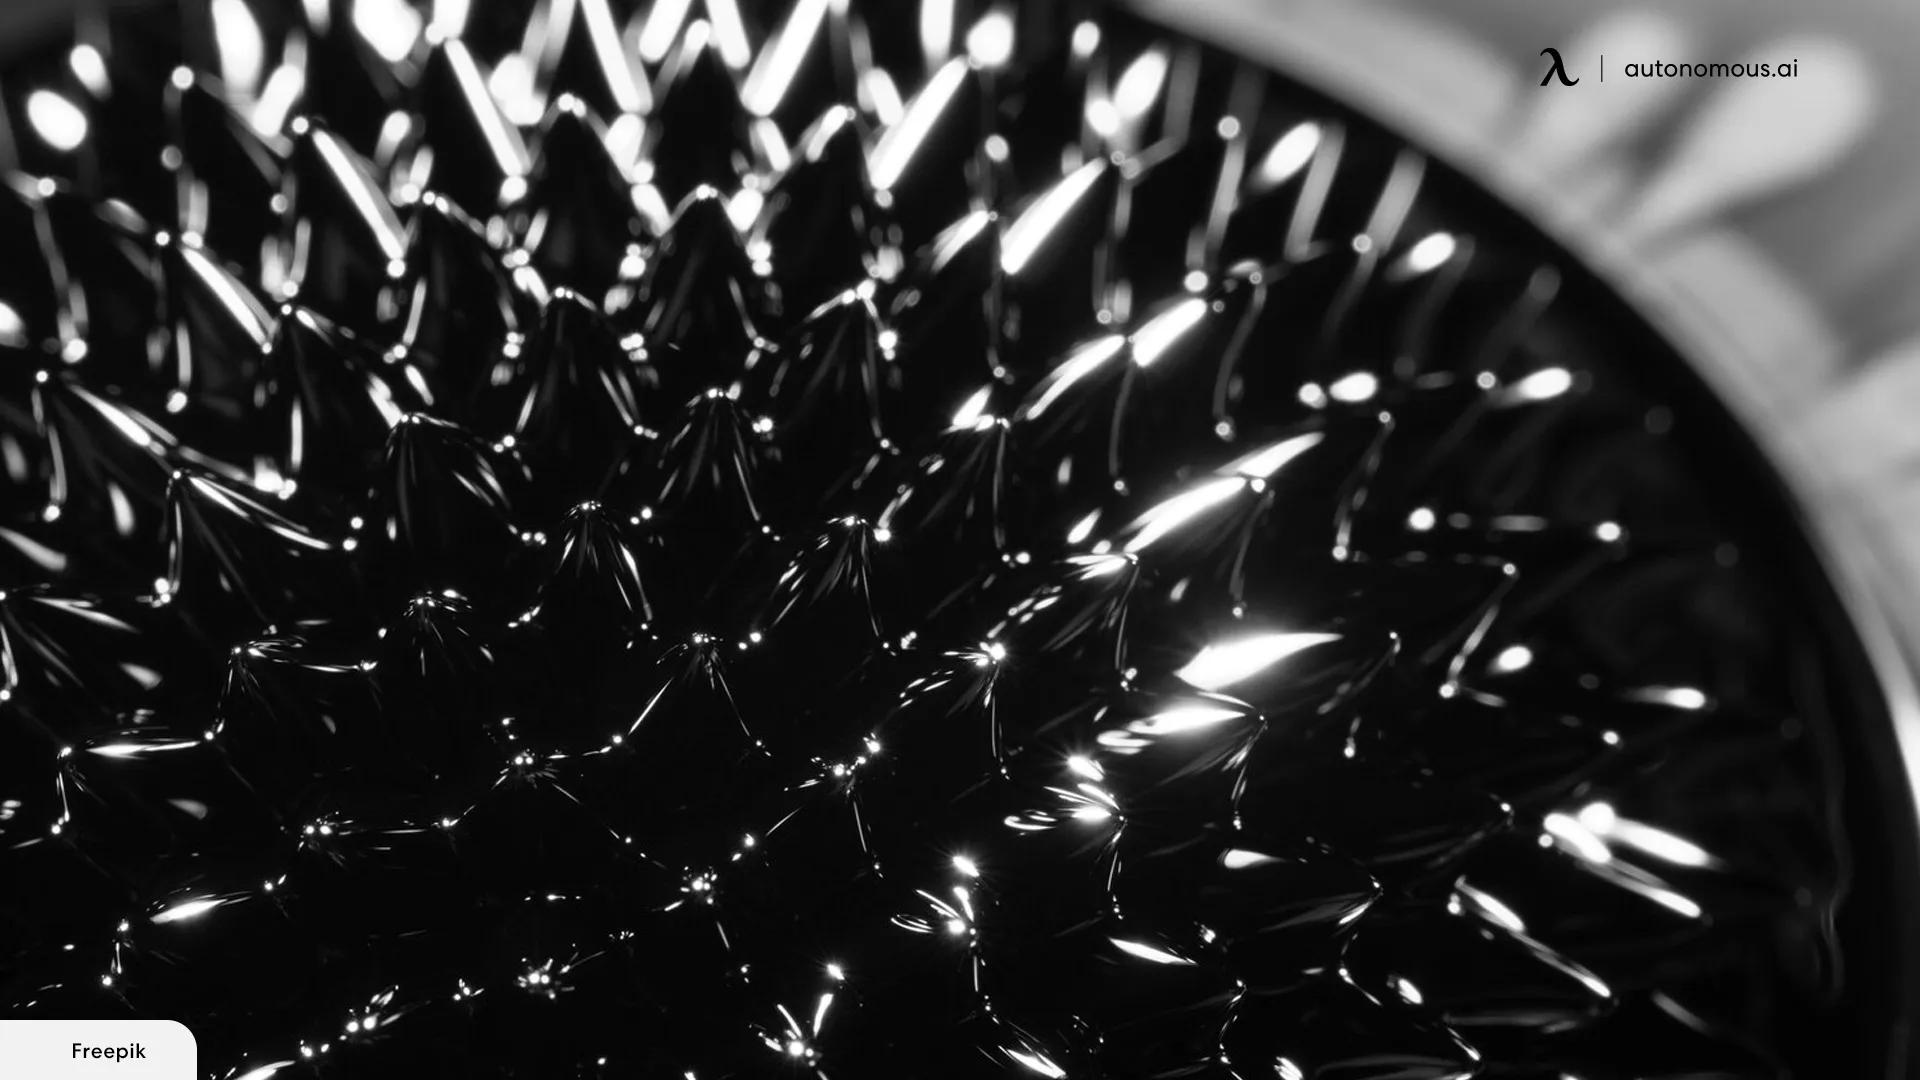 A Blast from the Past: The Birth of Ferrofluids